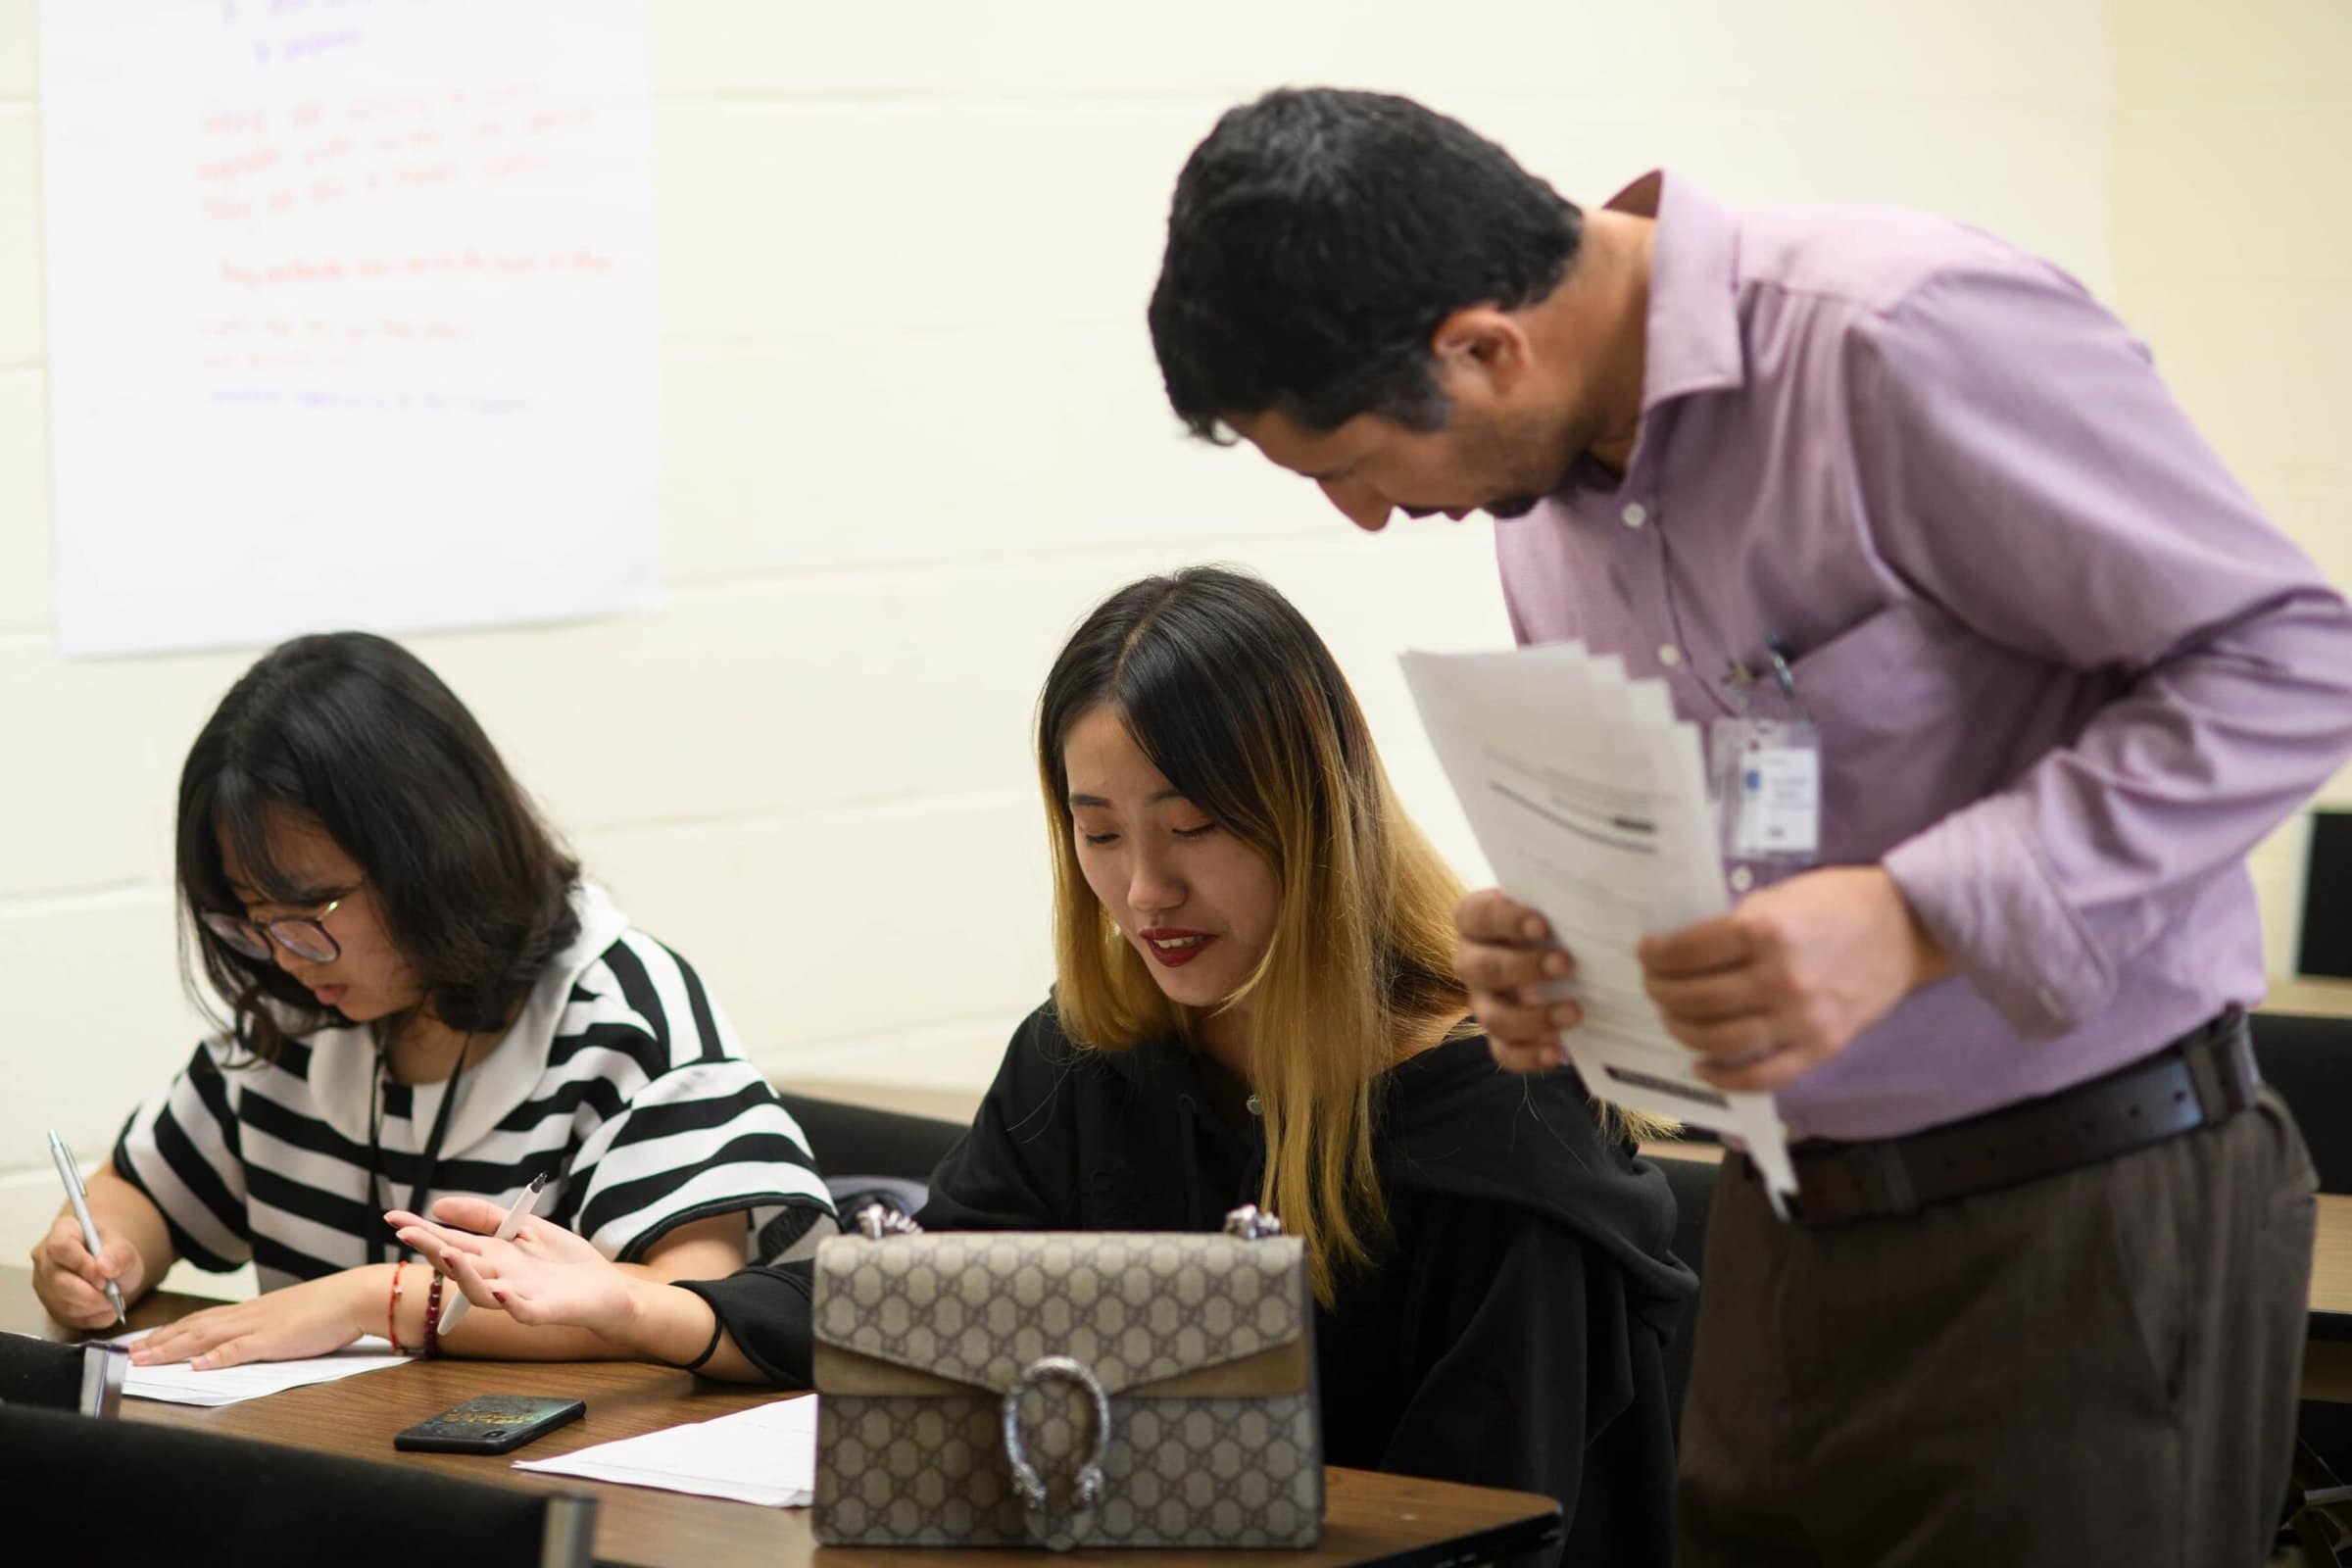 Khalid Ibrahim, President of ON Language, explains an assignment to Xu "Lexy" Ying, left, and Zhou "Sylvia" Yu, education majors from Brenau's 2+2 program with Anhui Normal University, during an ON Language class at Brenau University. (AJ Reynolds/Brenau University)